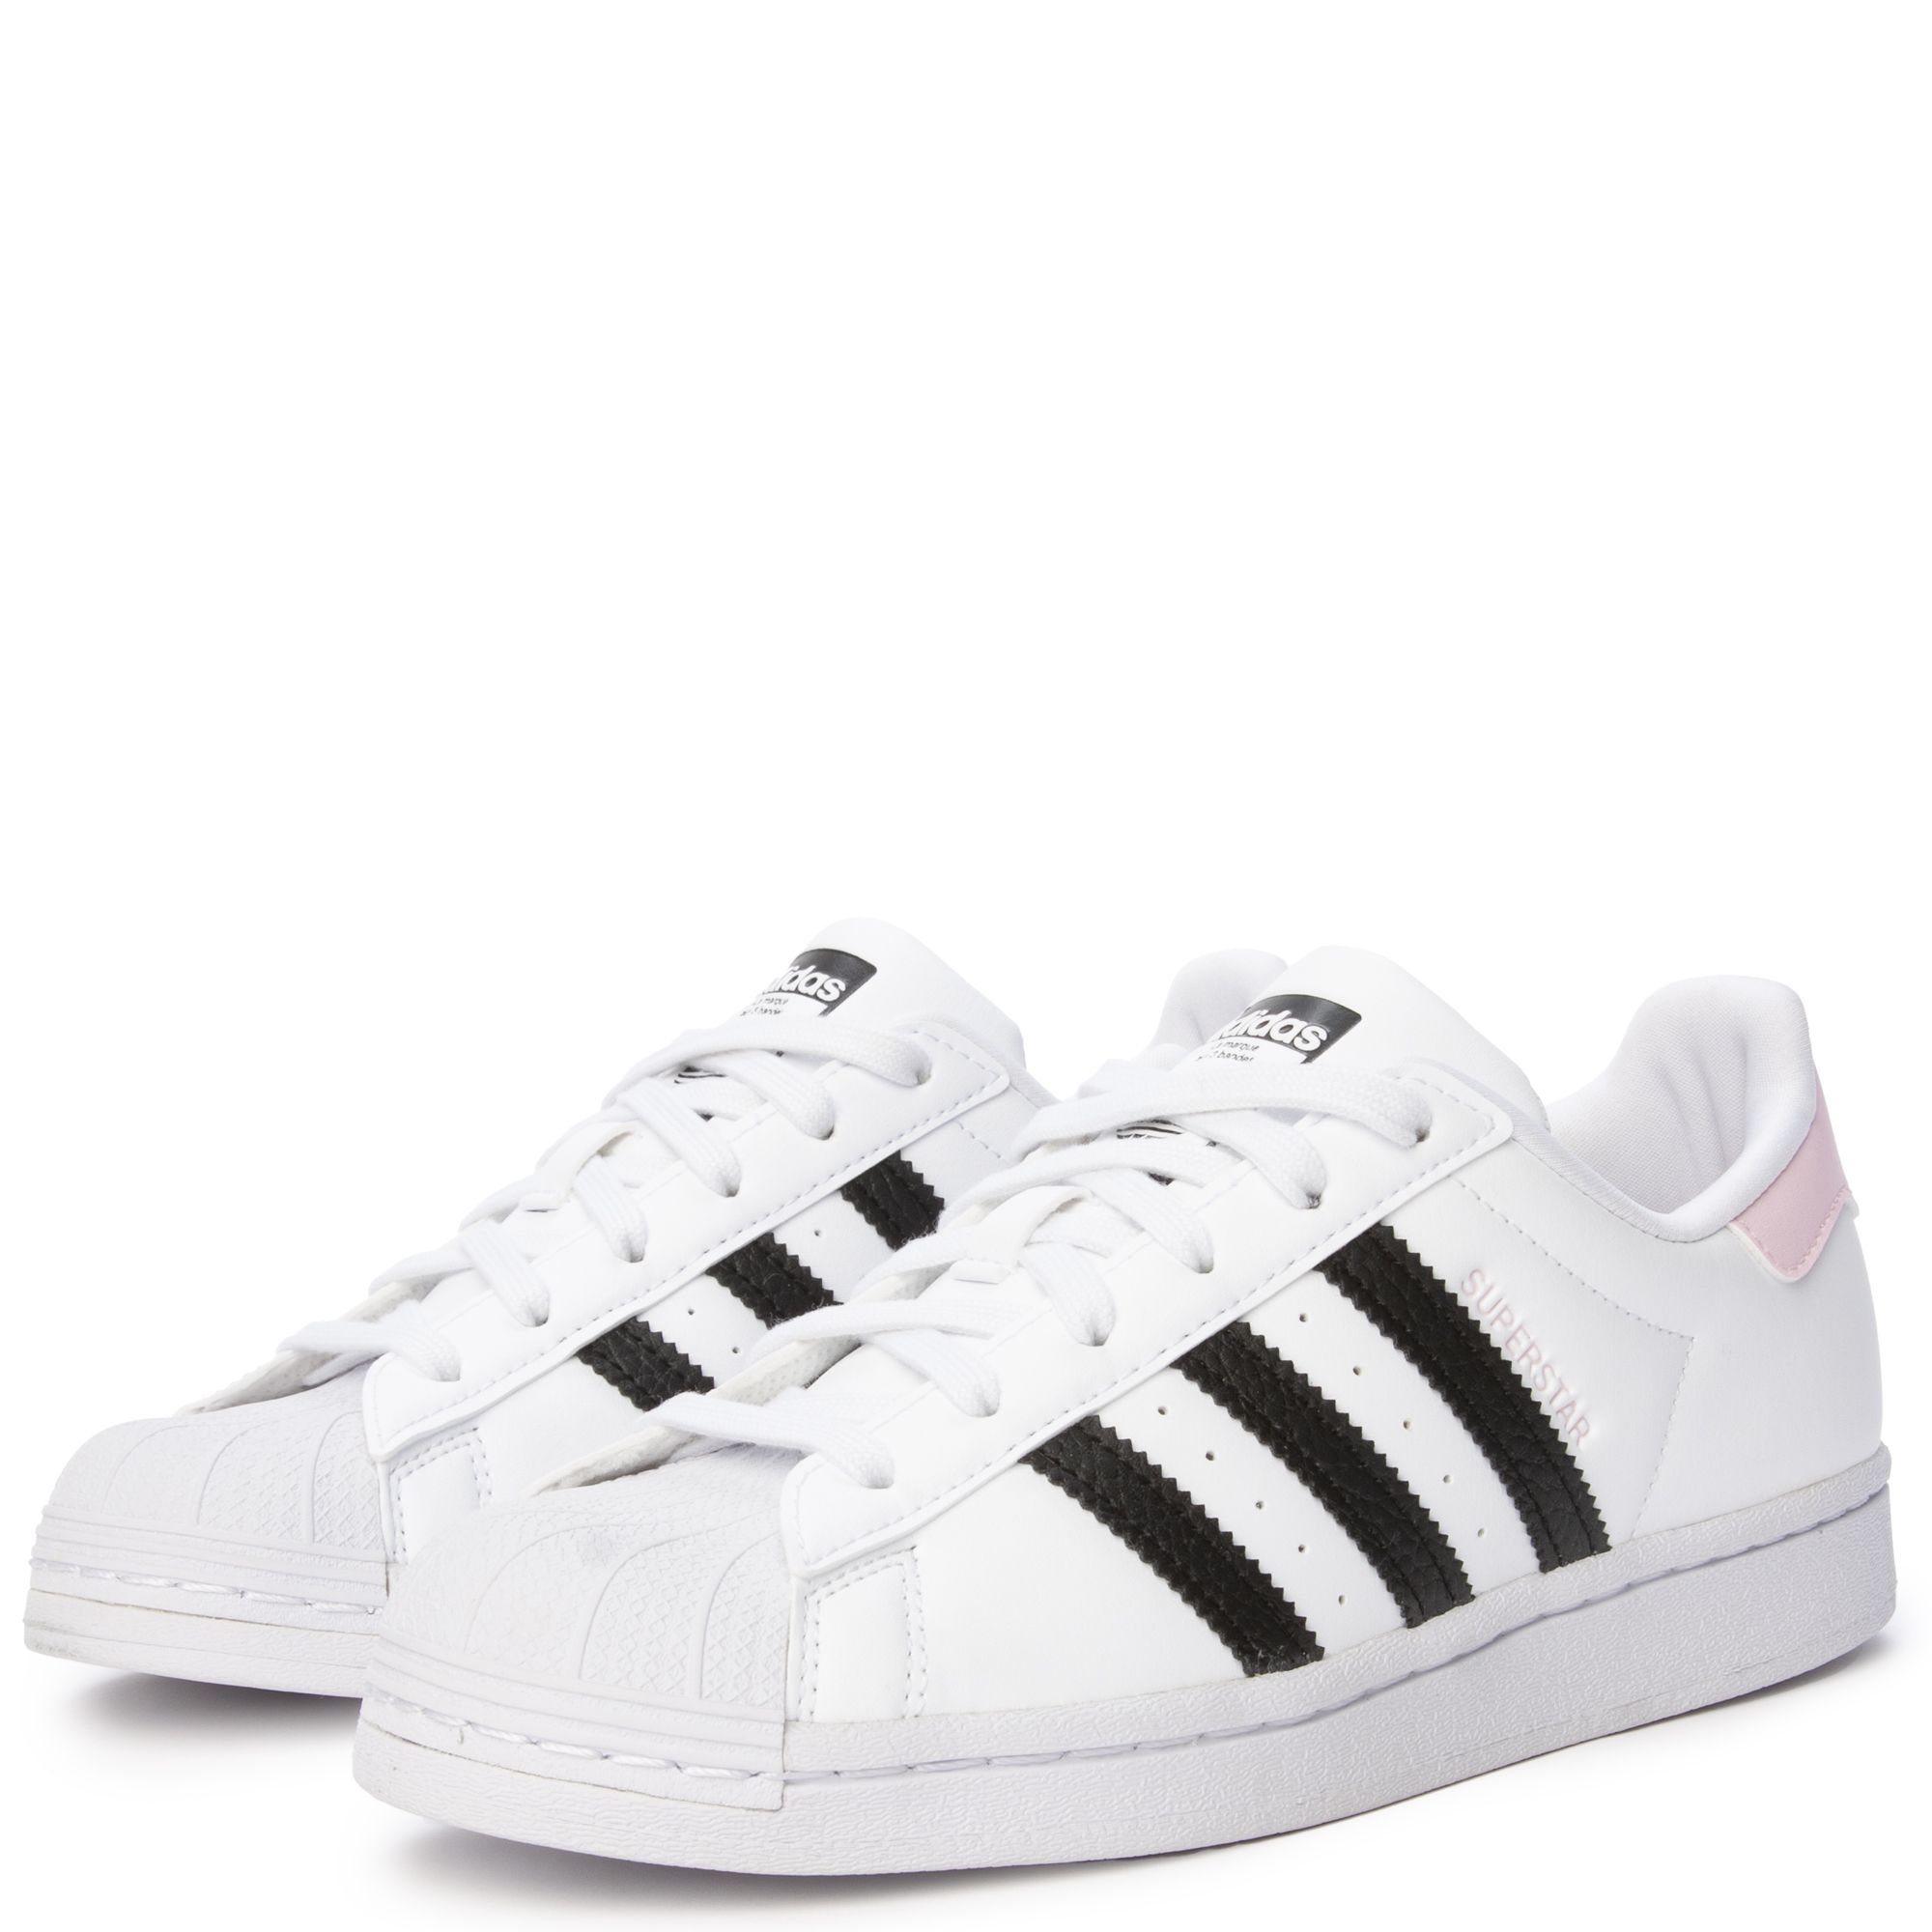 ADIDAS (GS) Superstar Shoes GY9320 - Shiekh